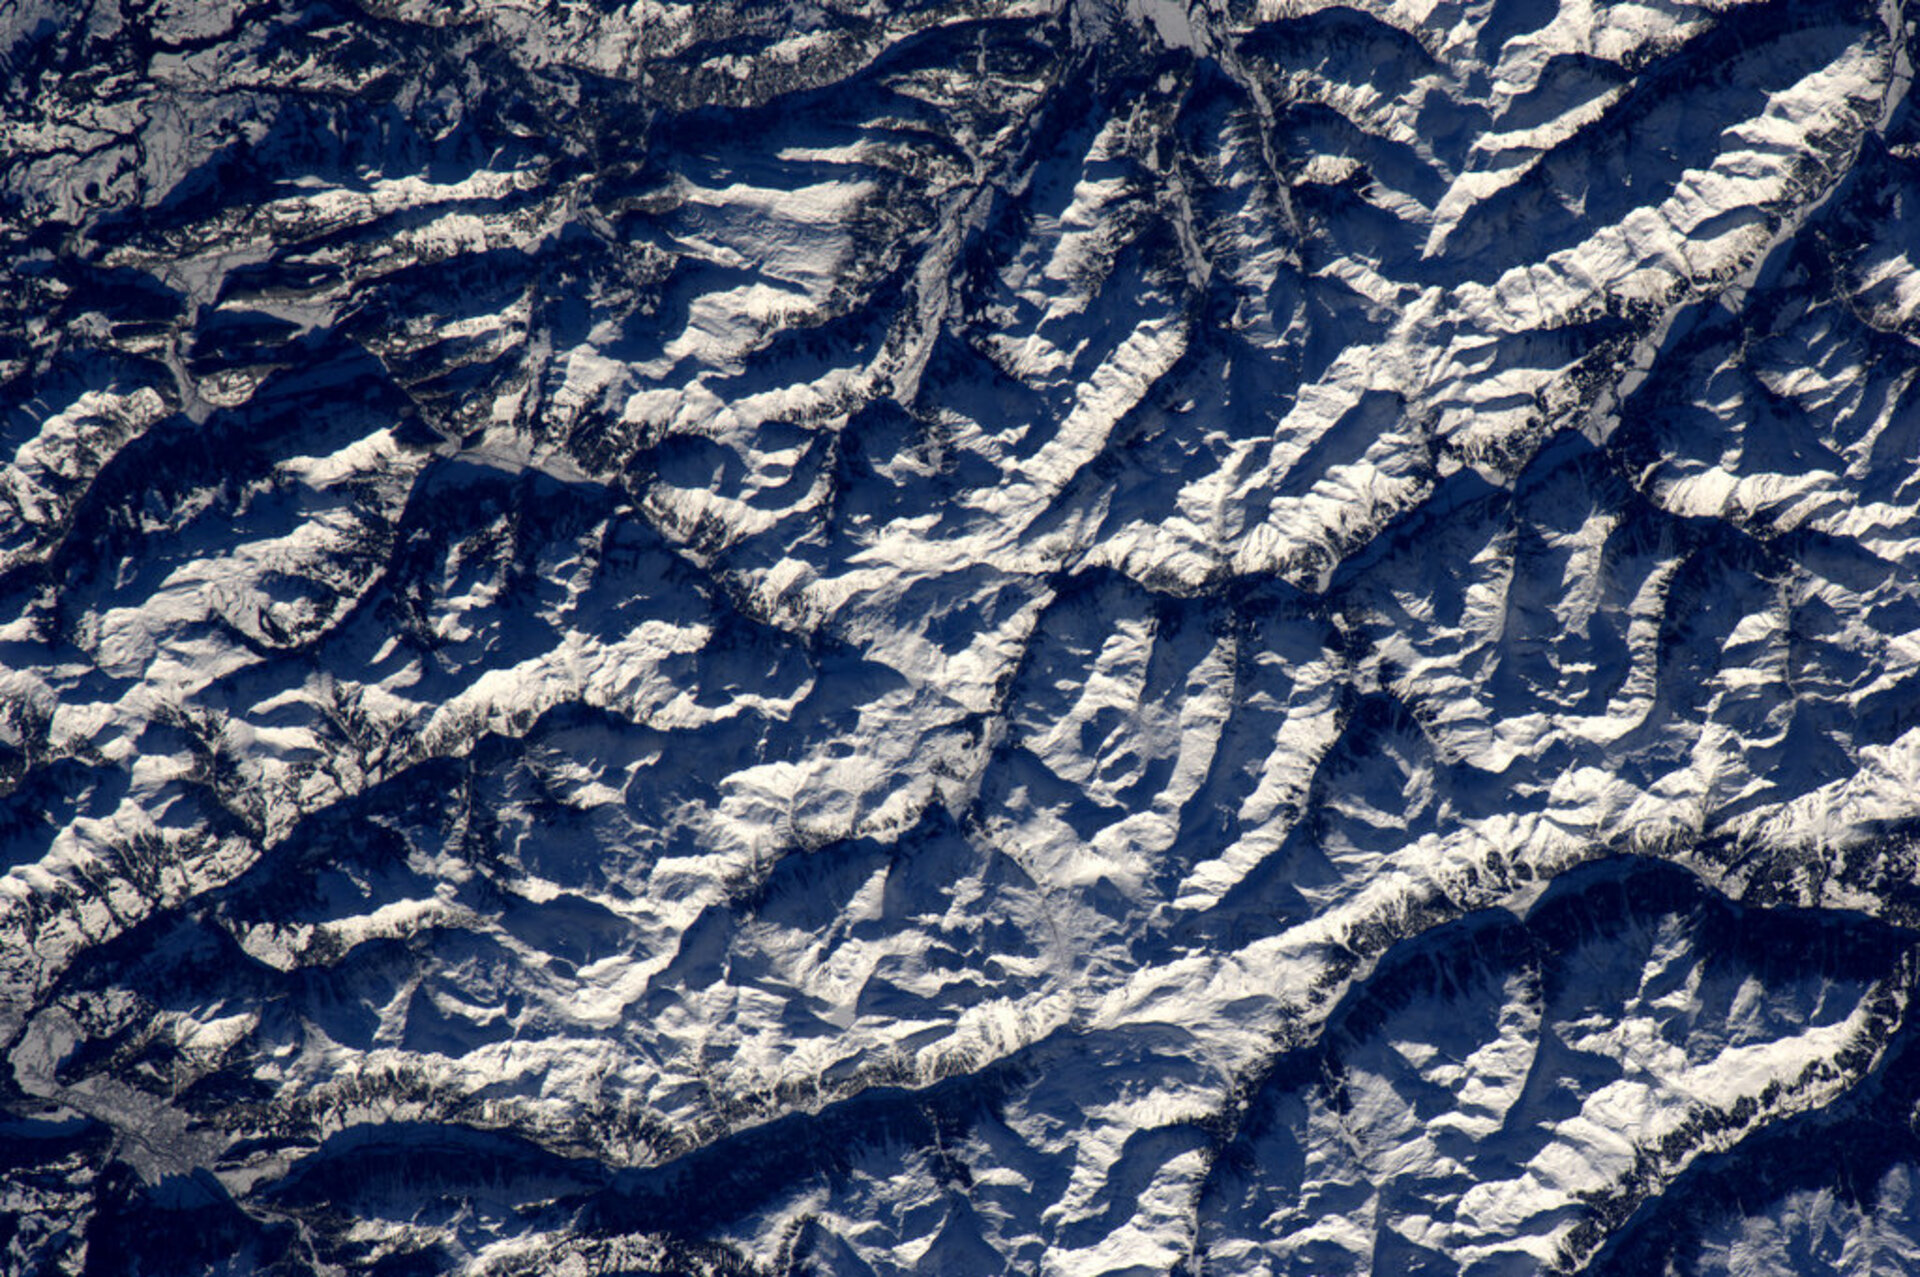 The Alps, as seen from the ISS